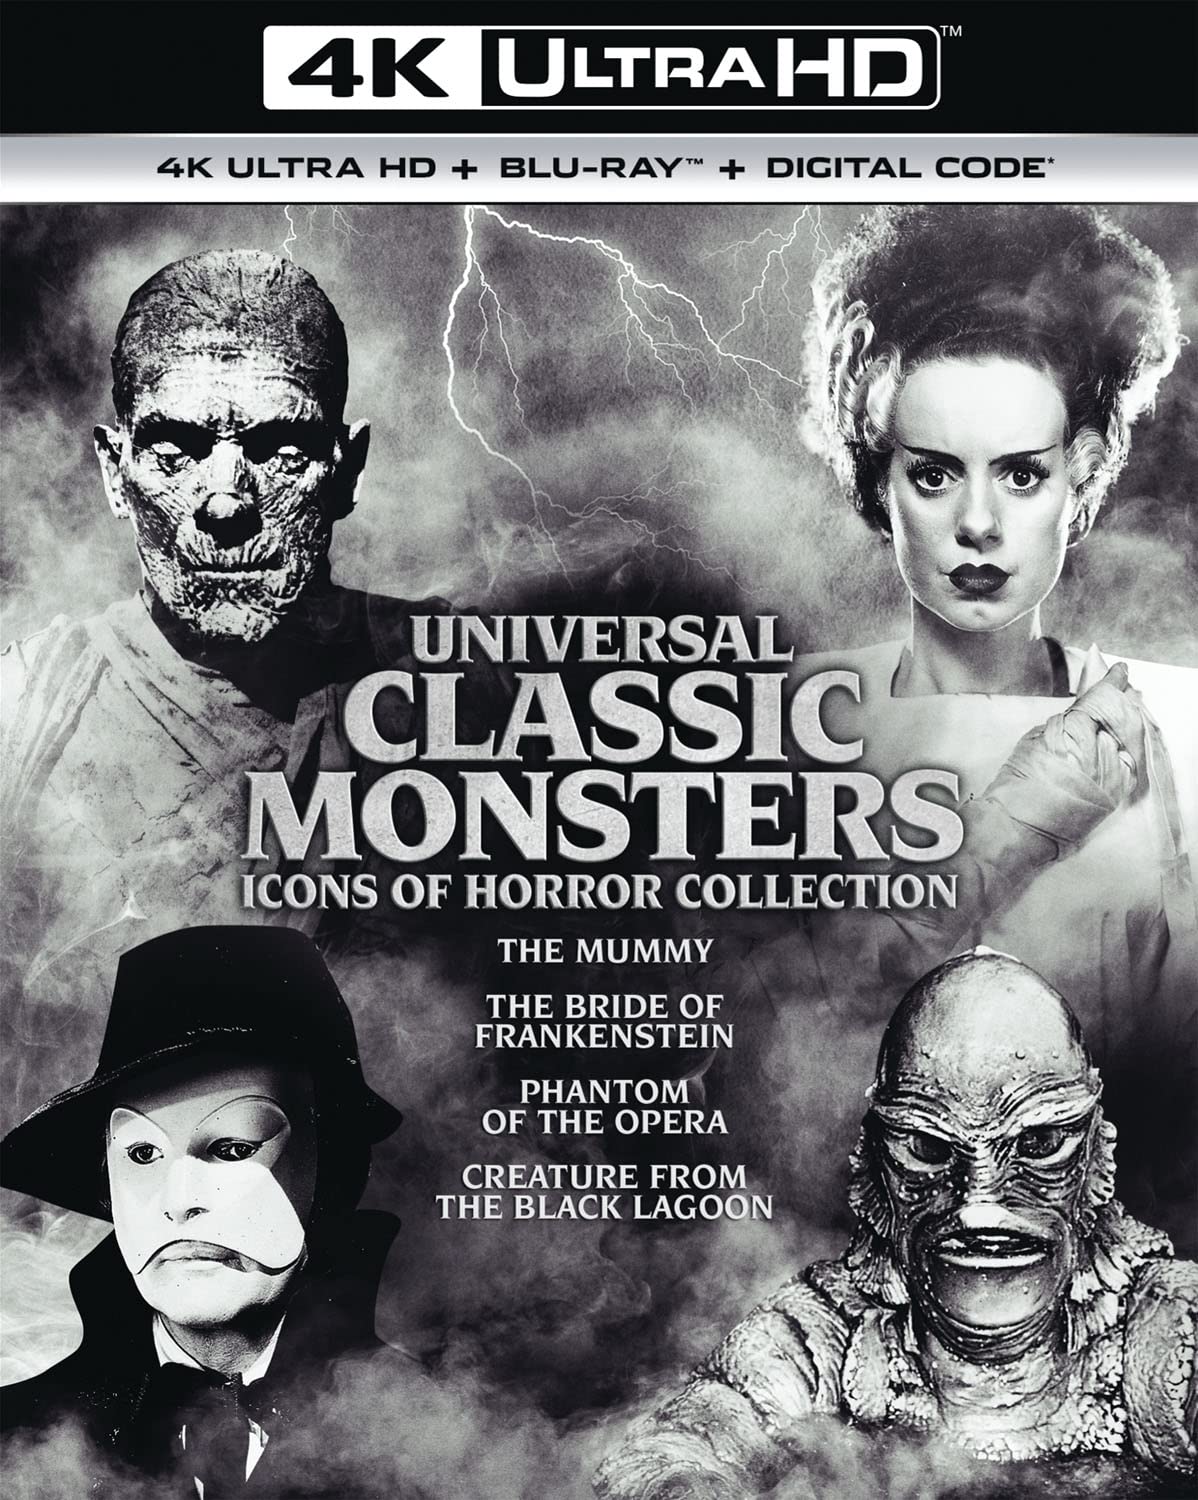 Universal Classic Monsters- Icons of Horror Collection 4k Blu-ray flat